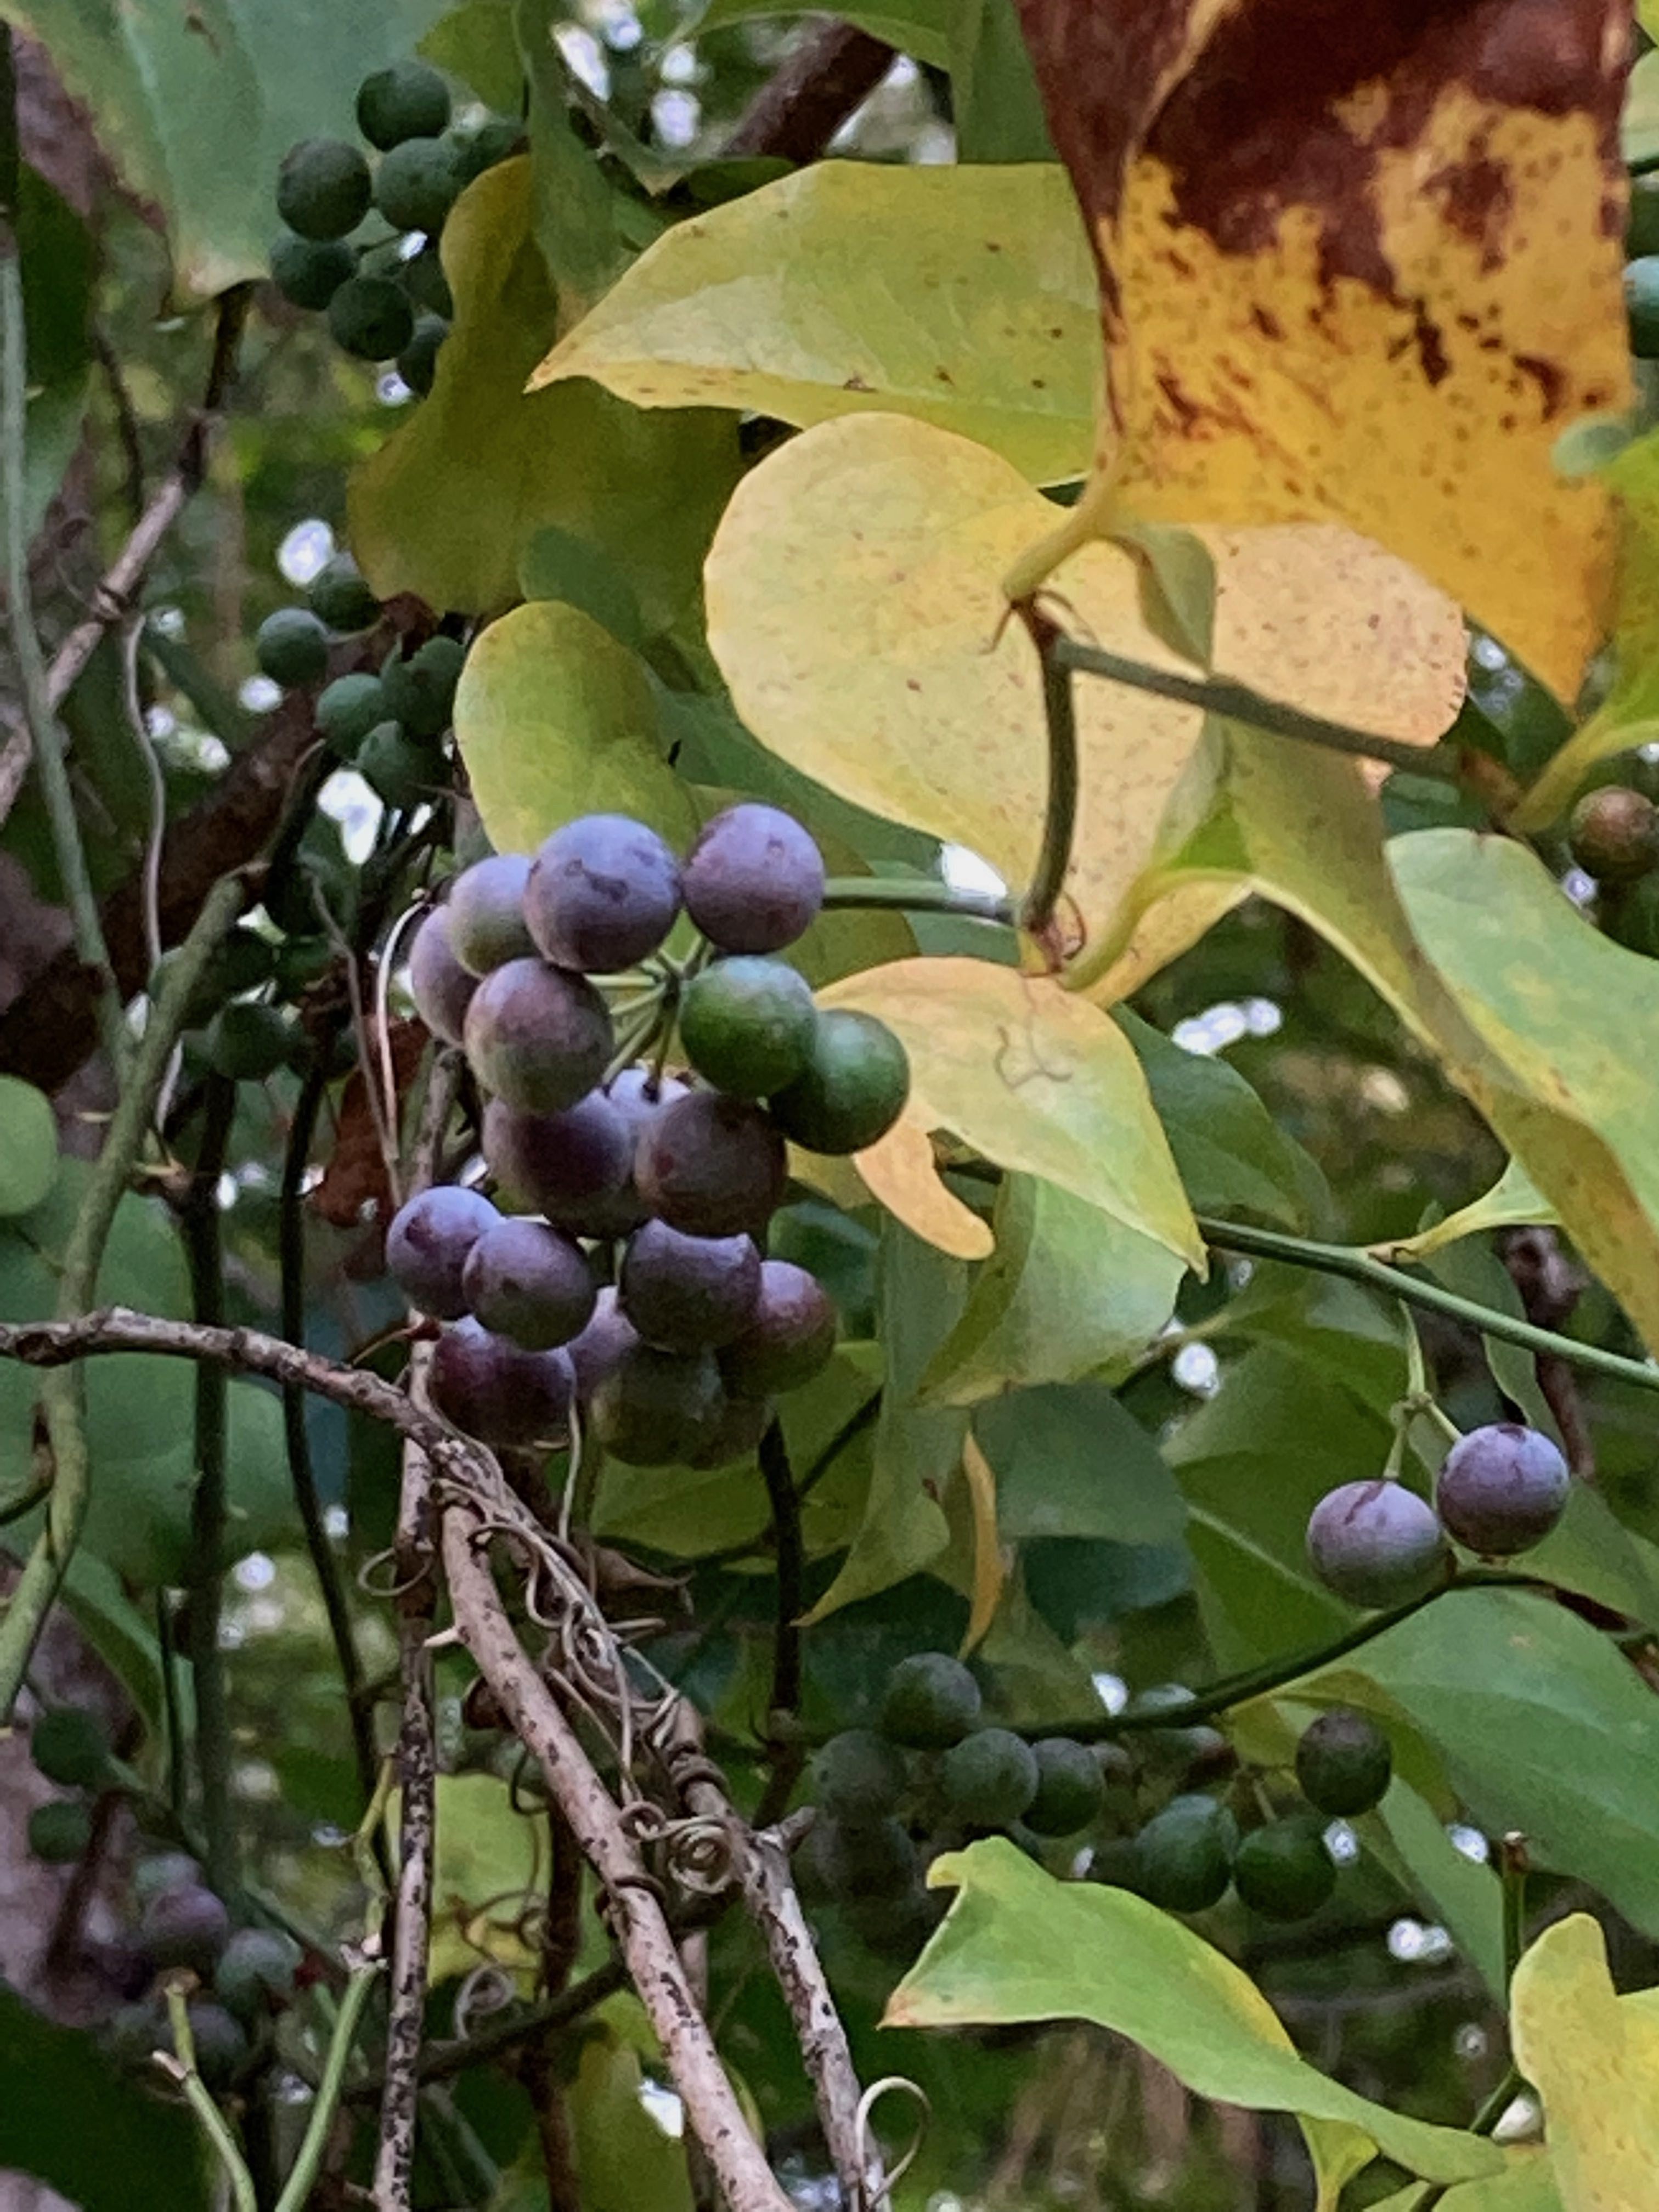 The Scientific Name is Smilax rotundifolia. You will likely hear them called Common Greenbriar, Bullbriar, Horsebriar. This picture shows the The blue-black berries ripen in fall. The pedicel bases lack prominent bracts as with some species of <em>Smilax</em>. of Smilax rotundifolia